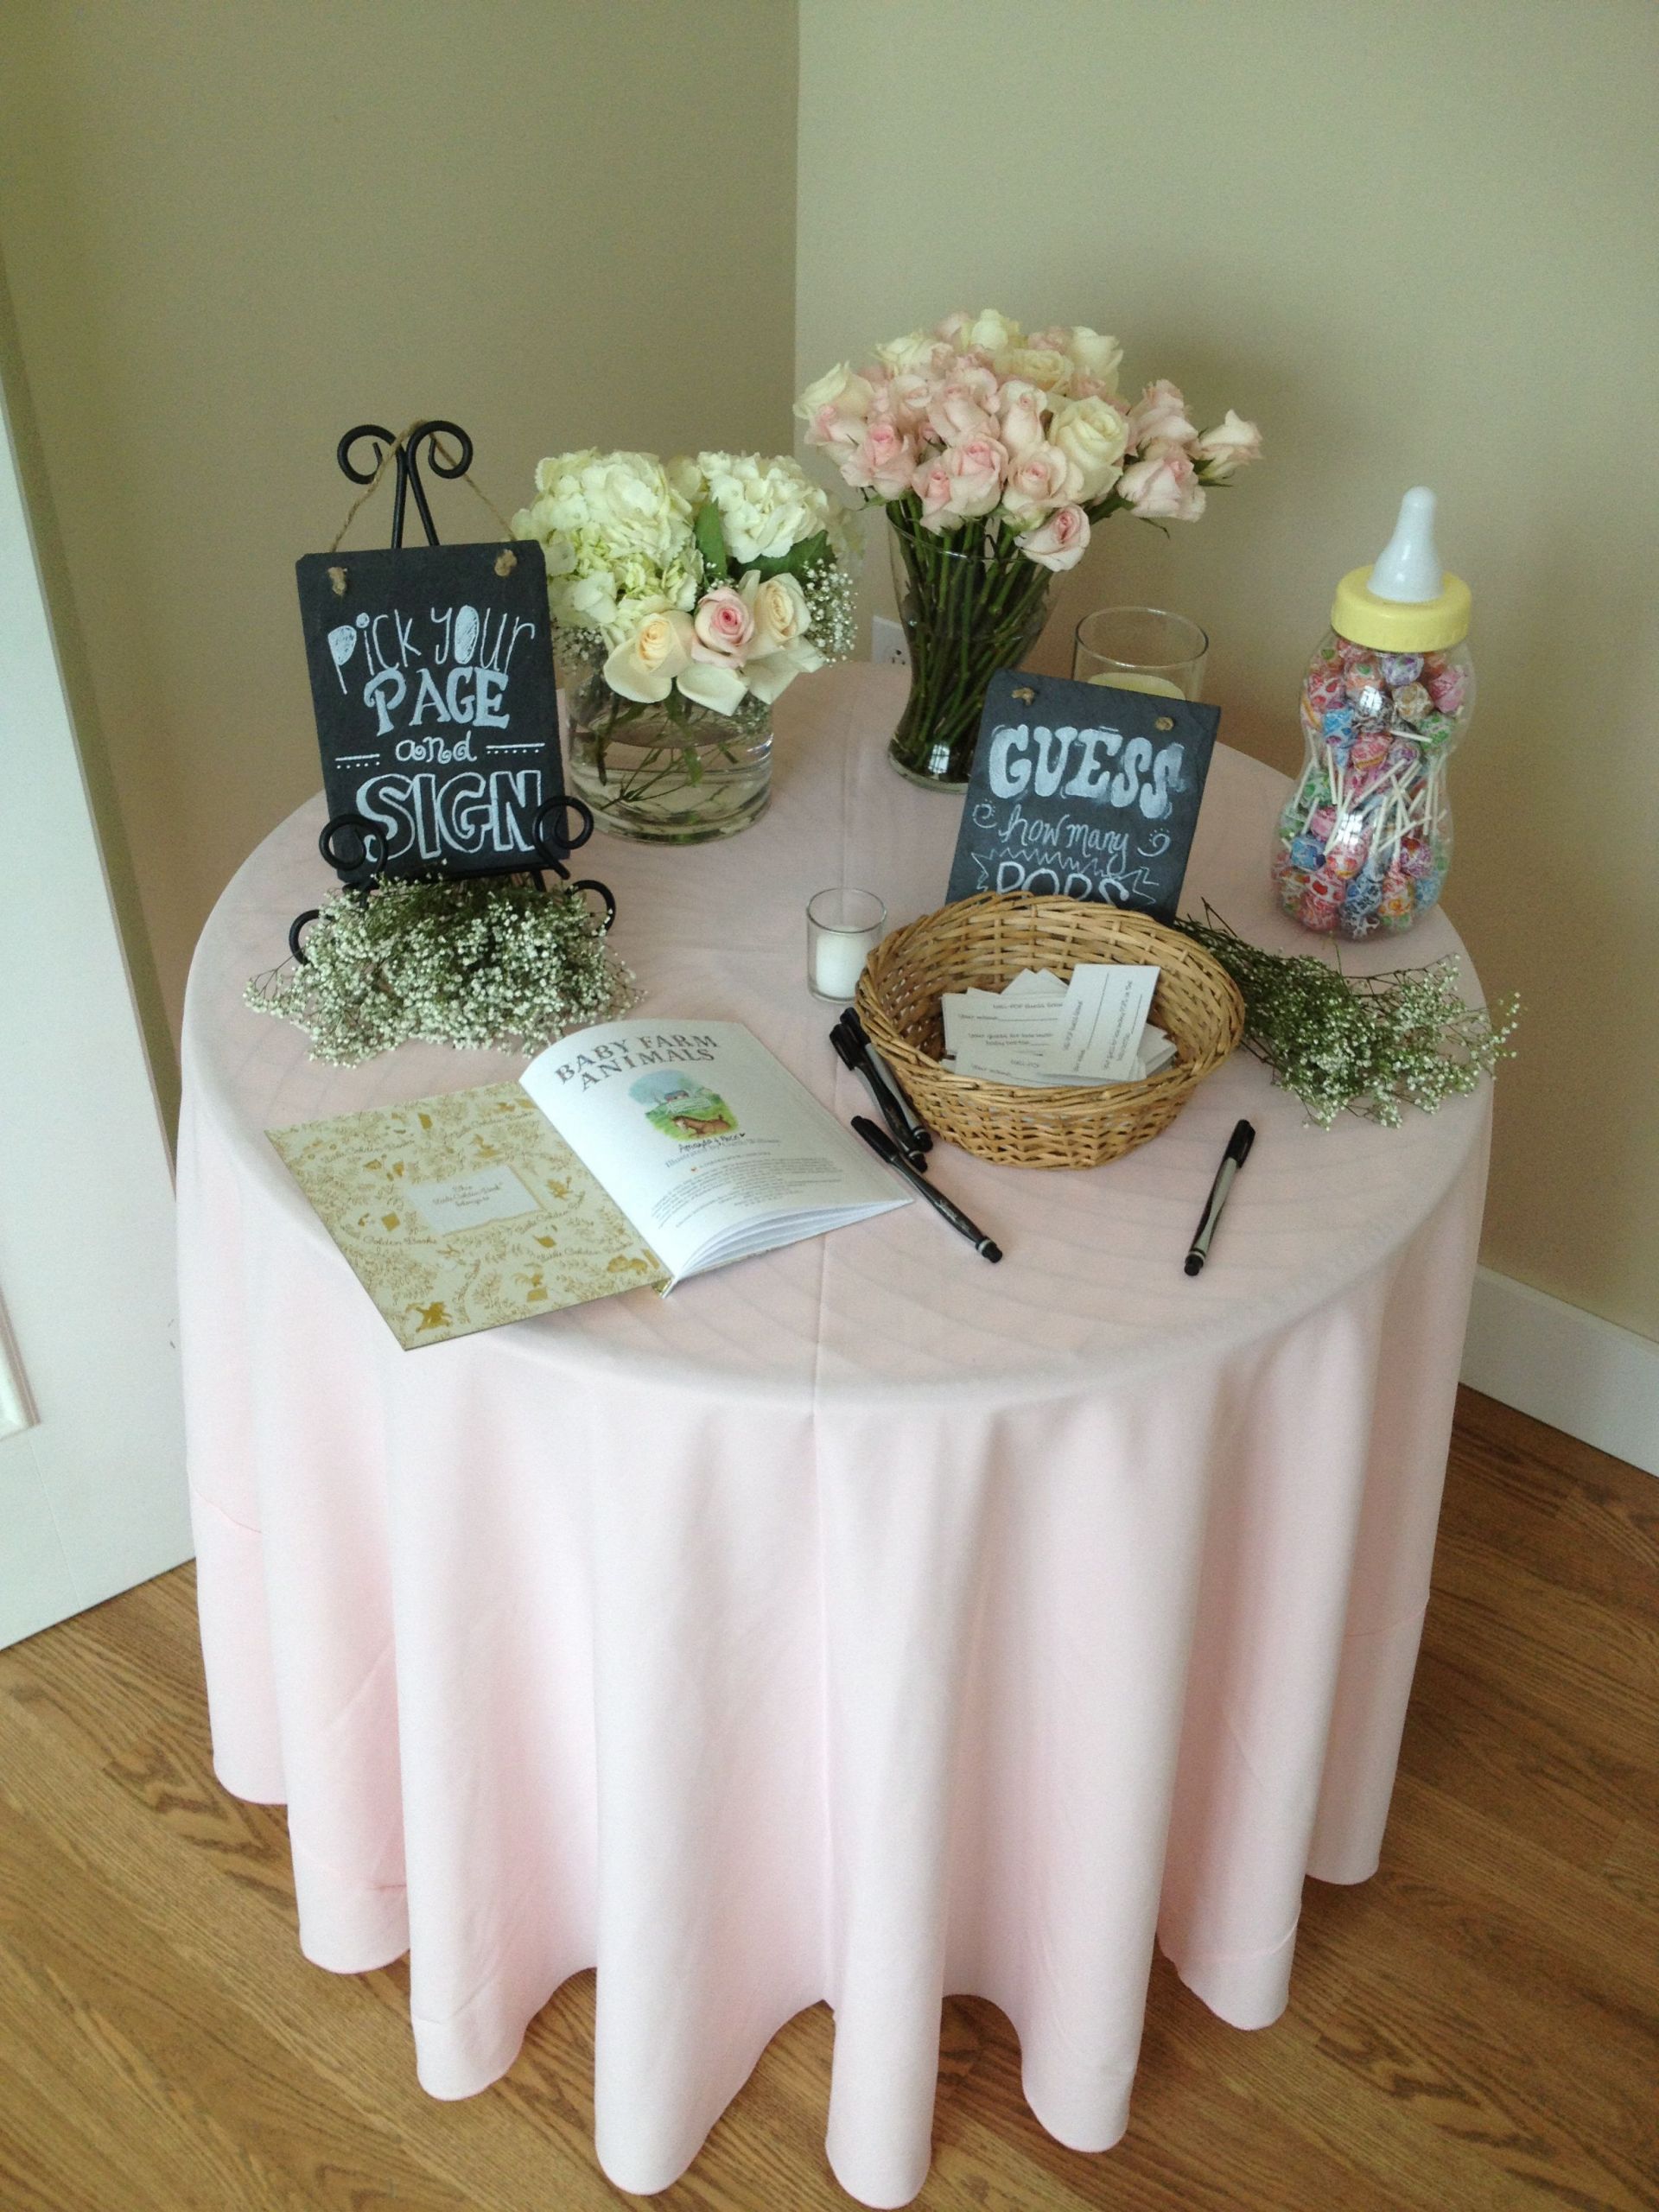 Decorating Ideas For Baby Shower Gift Table
 Entrance Table at a baby shower Our Events